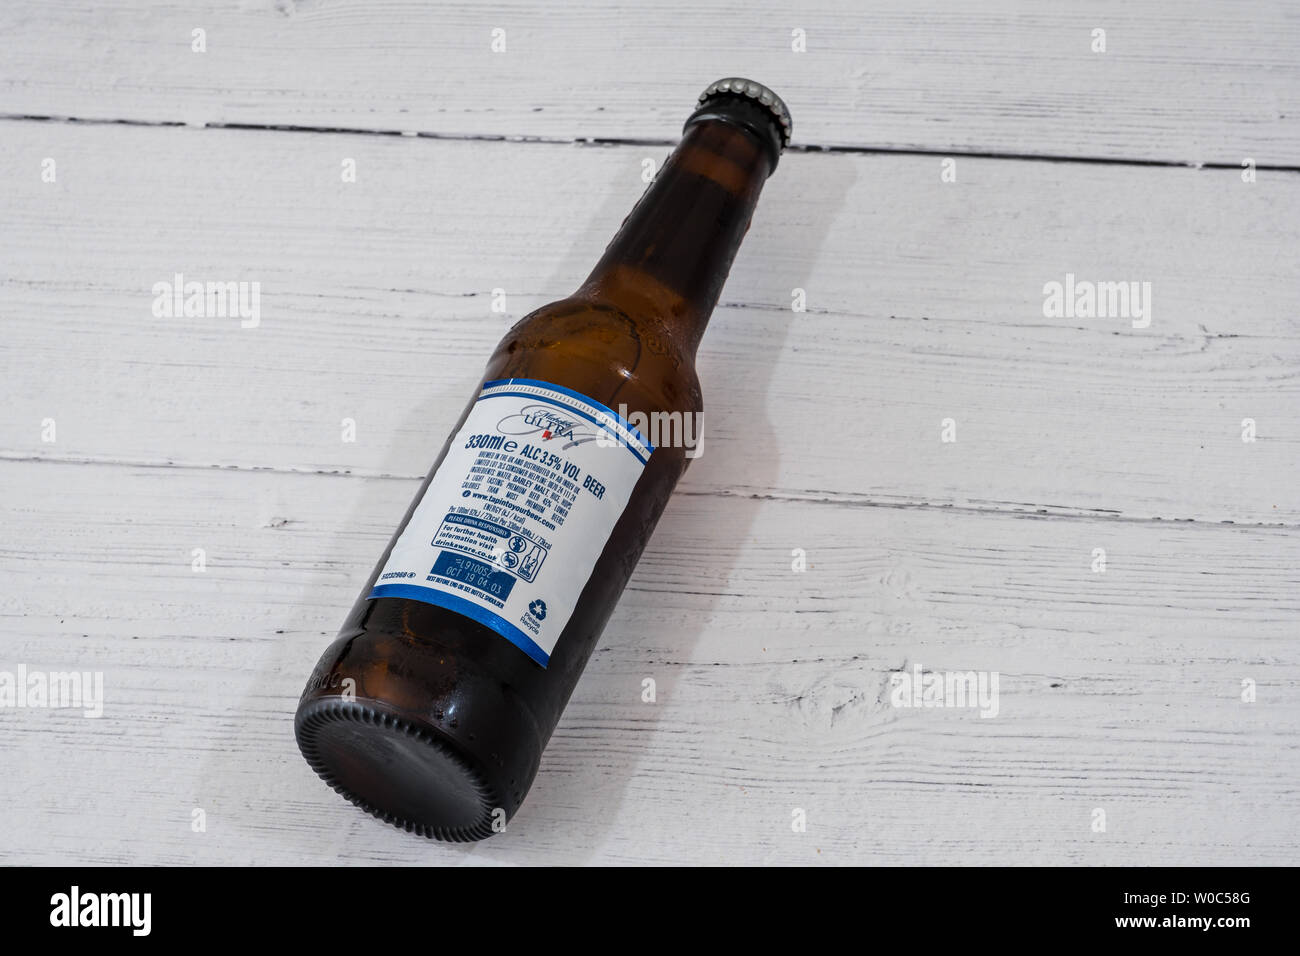 Largs, Scotland, UK - June 20, 2019: A Bottle of Michelob Ultra branded Lager Beer in recyclable glass bottle in line with current UK initiatives rear Stock Photo